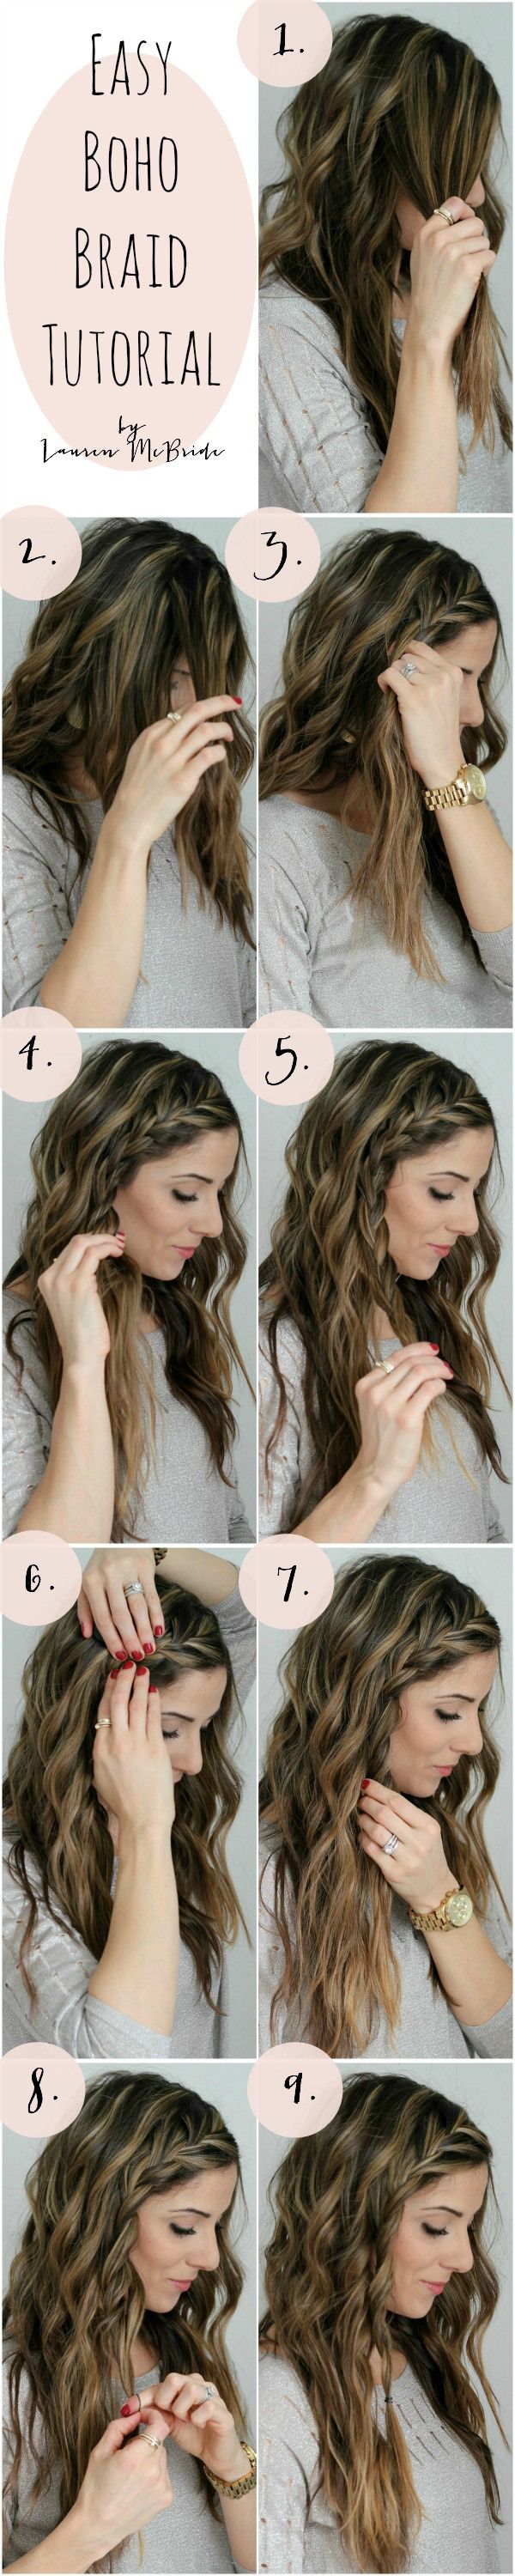 Simple And Easy 5 Minutes Hairstyle Tutorials Fashionsy Com